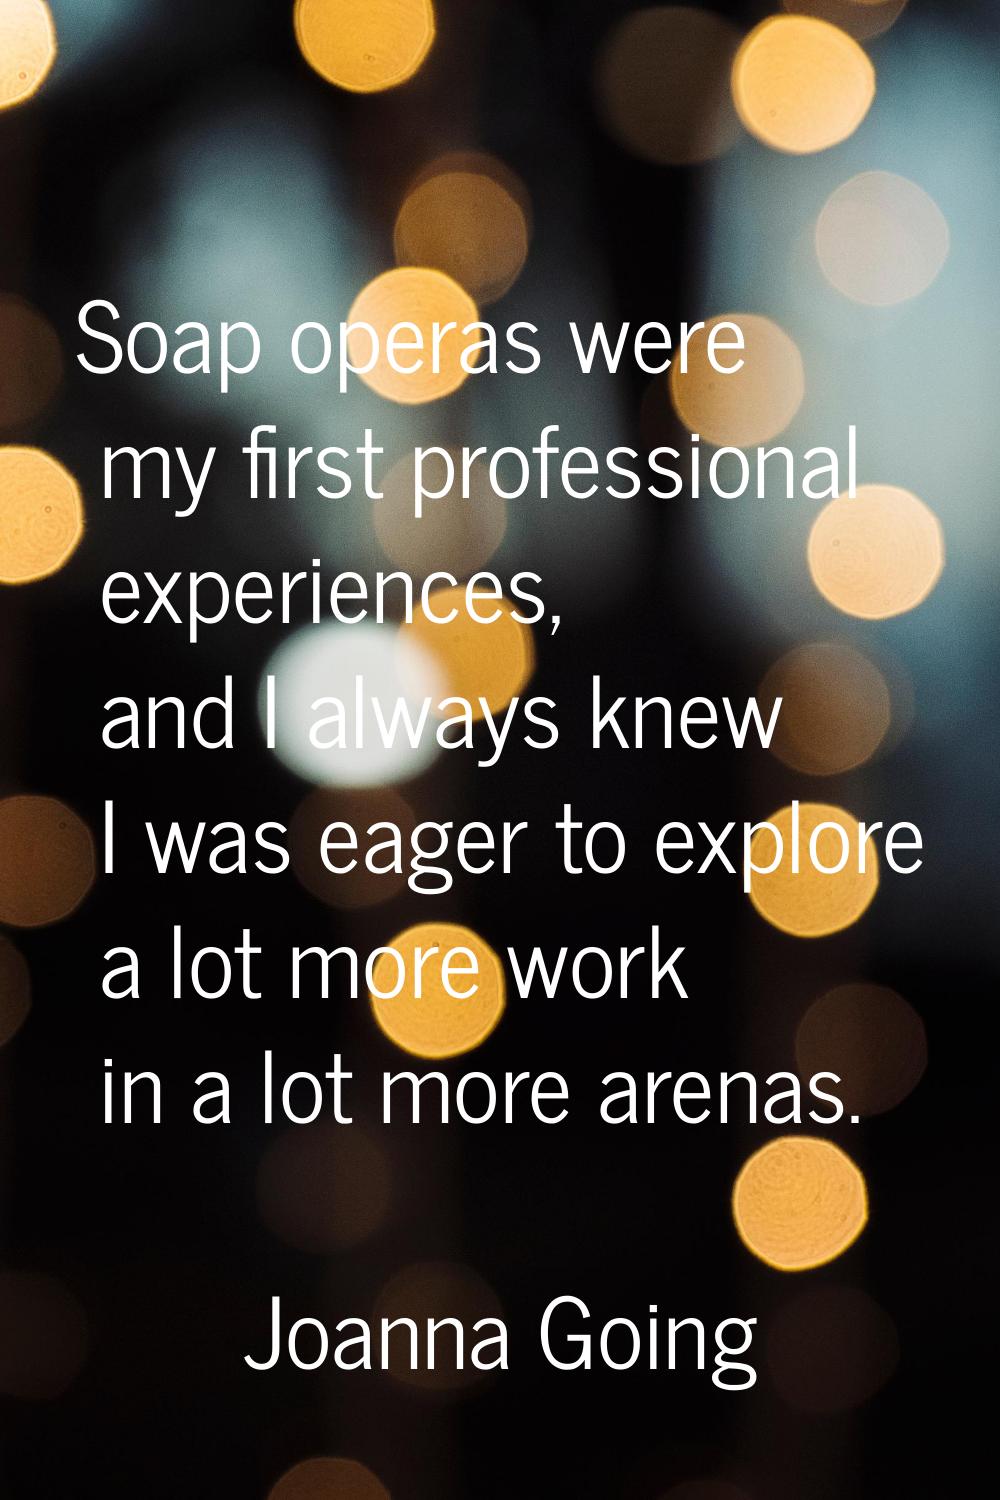 Soap operas were my first professional experiences, and I always knew I was eager to explore a lot 